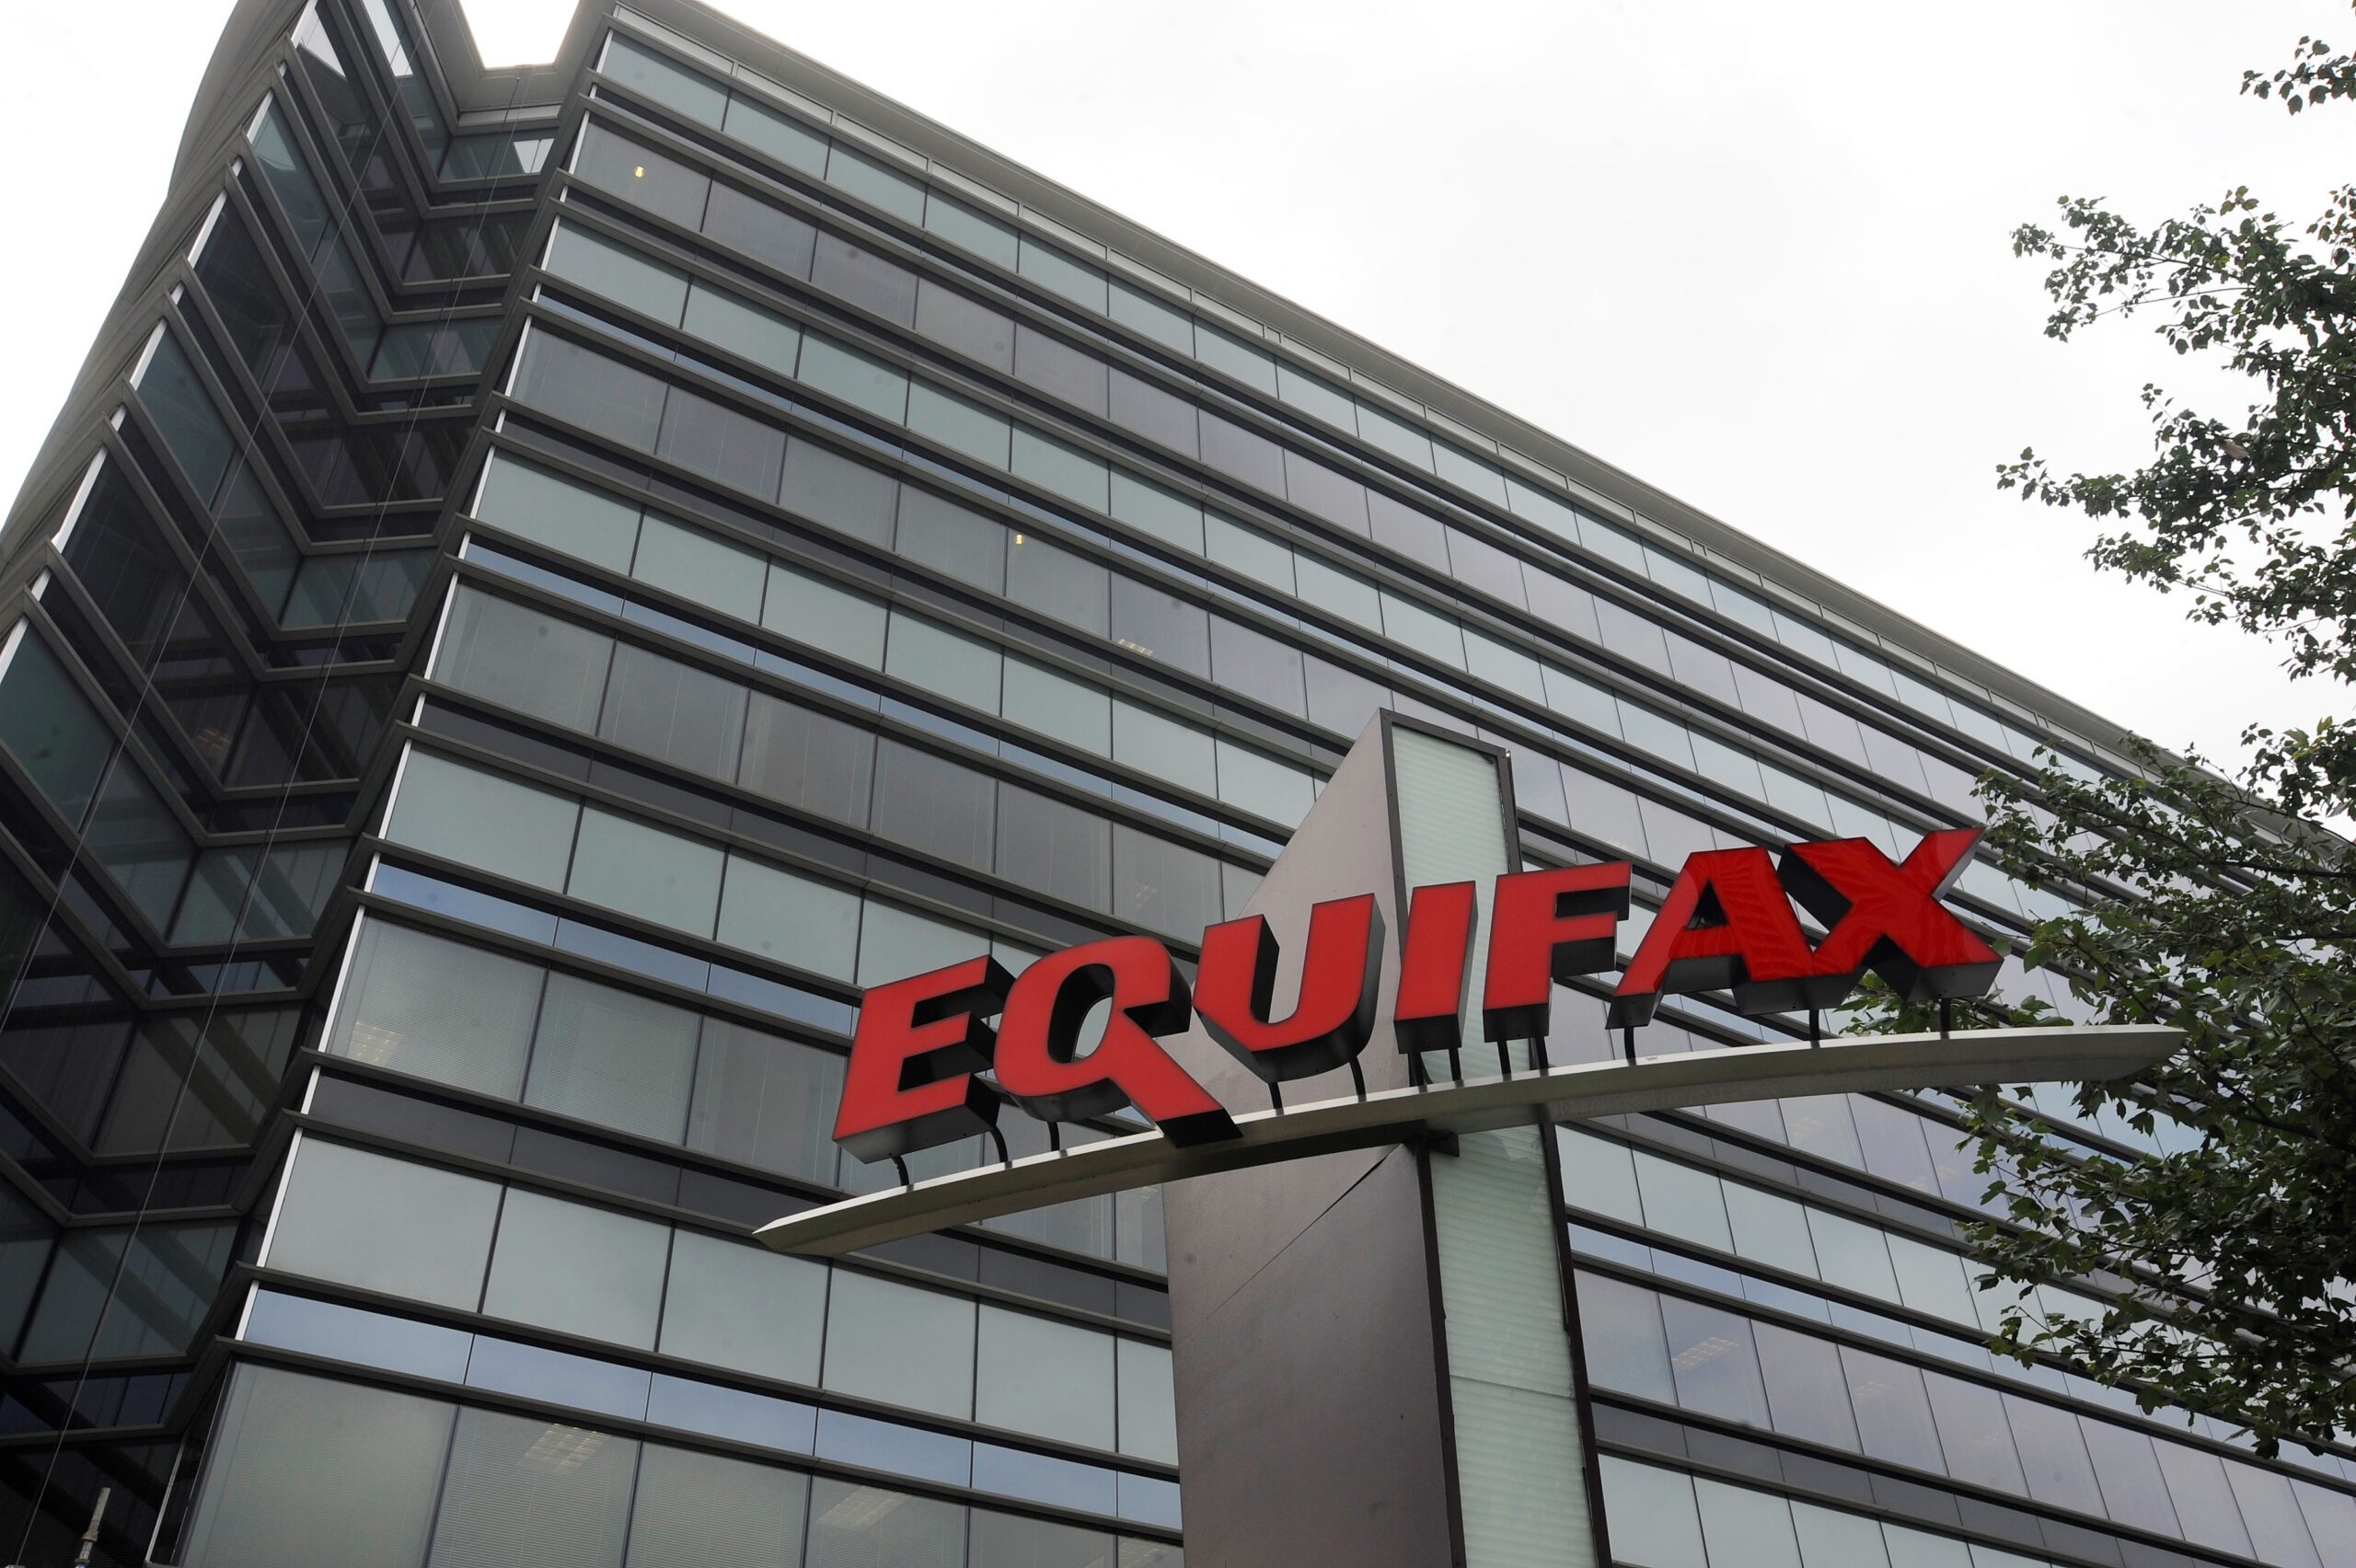 Equifax building